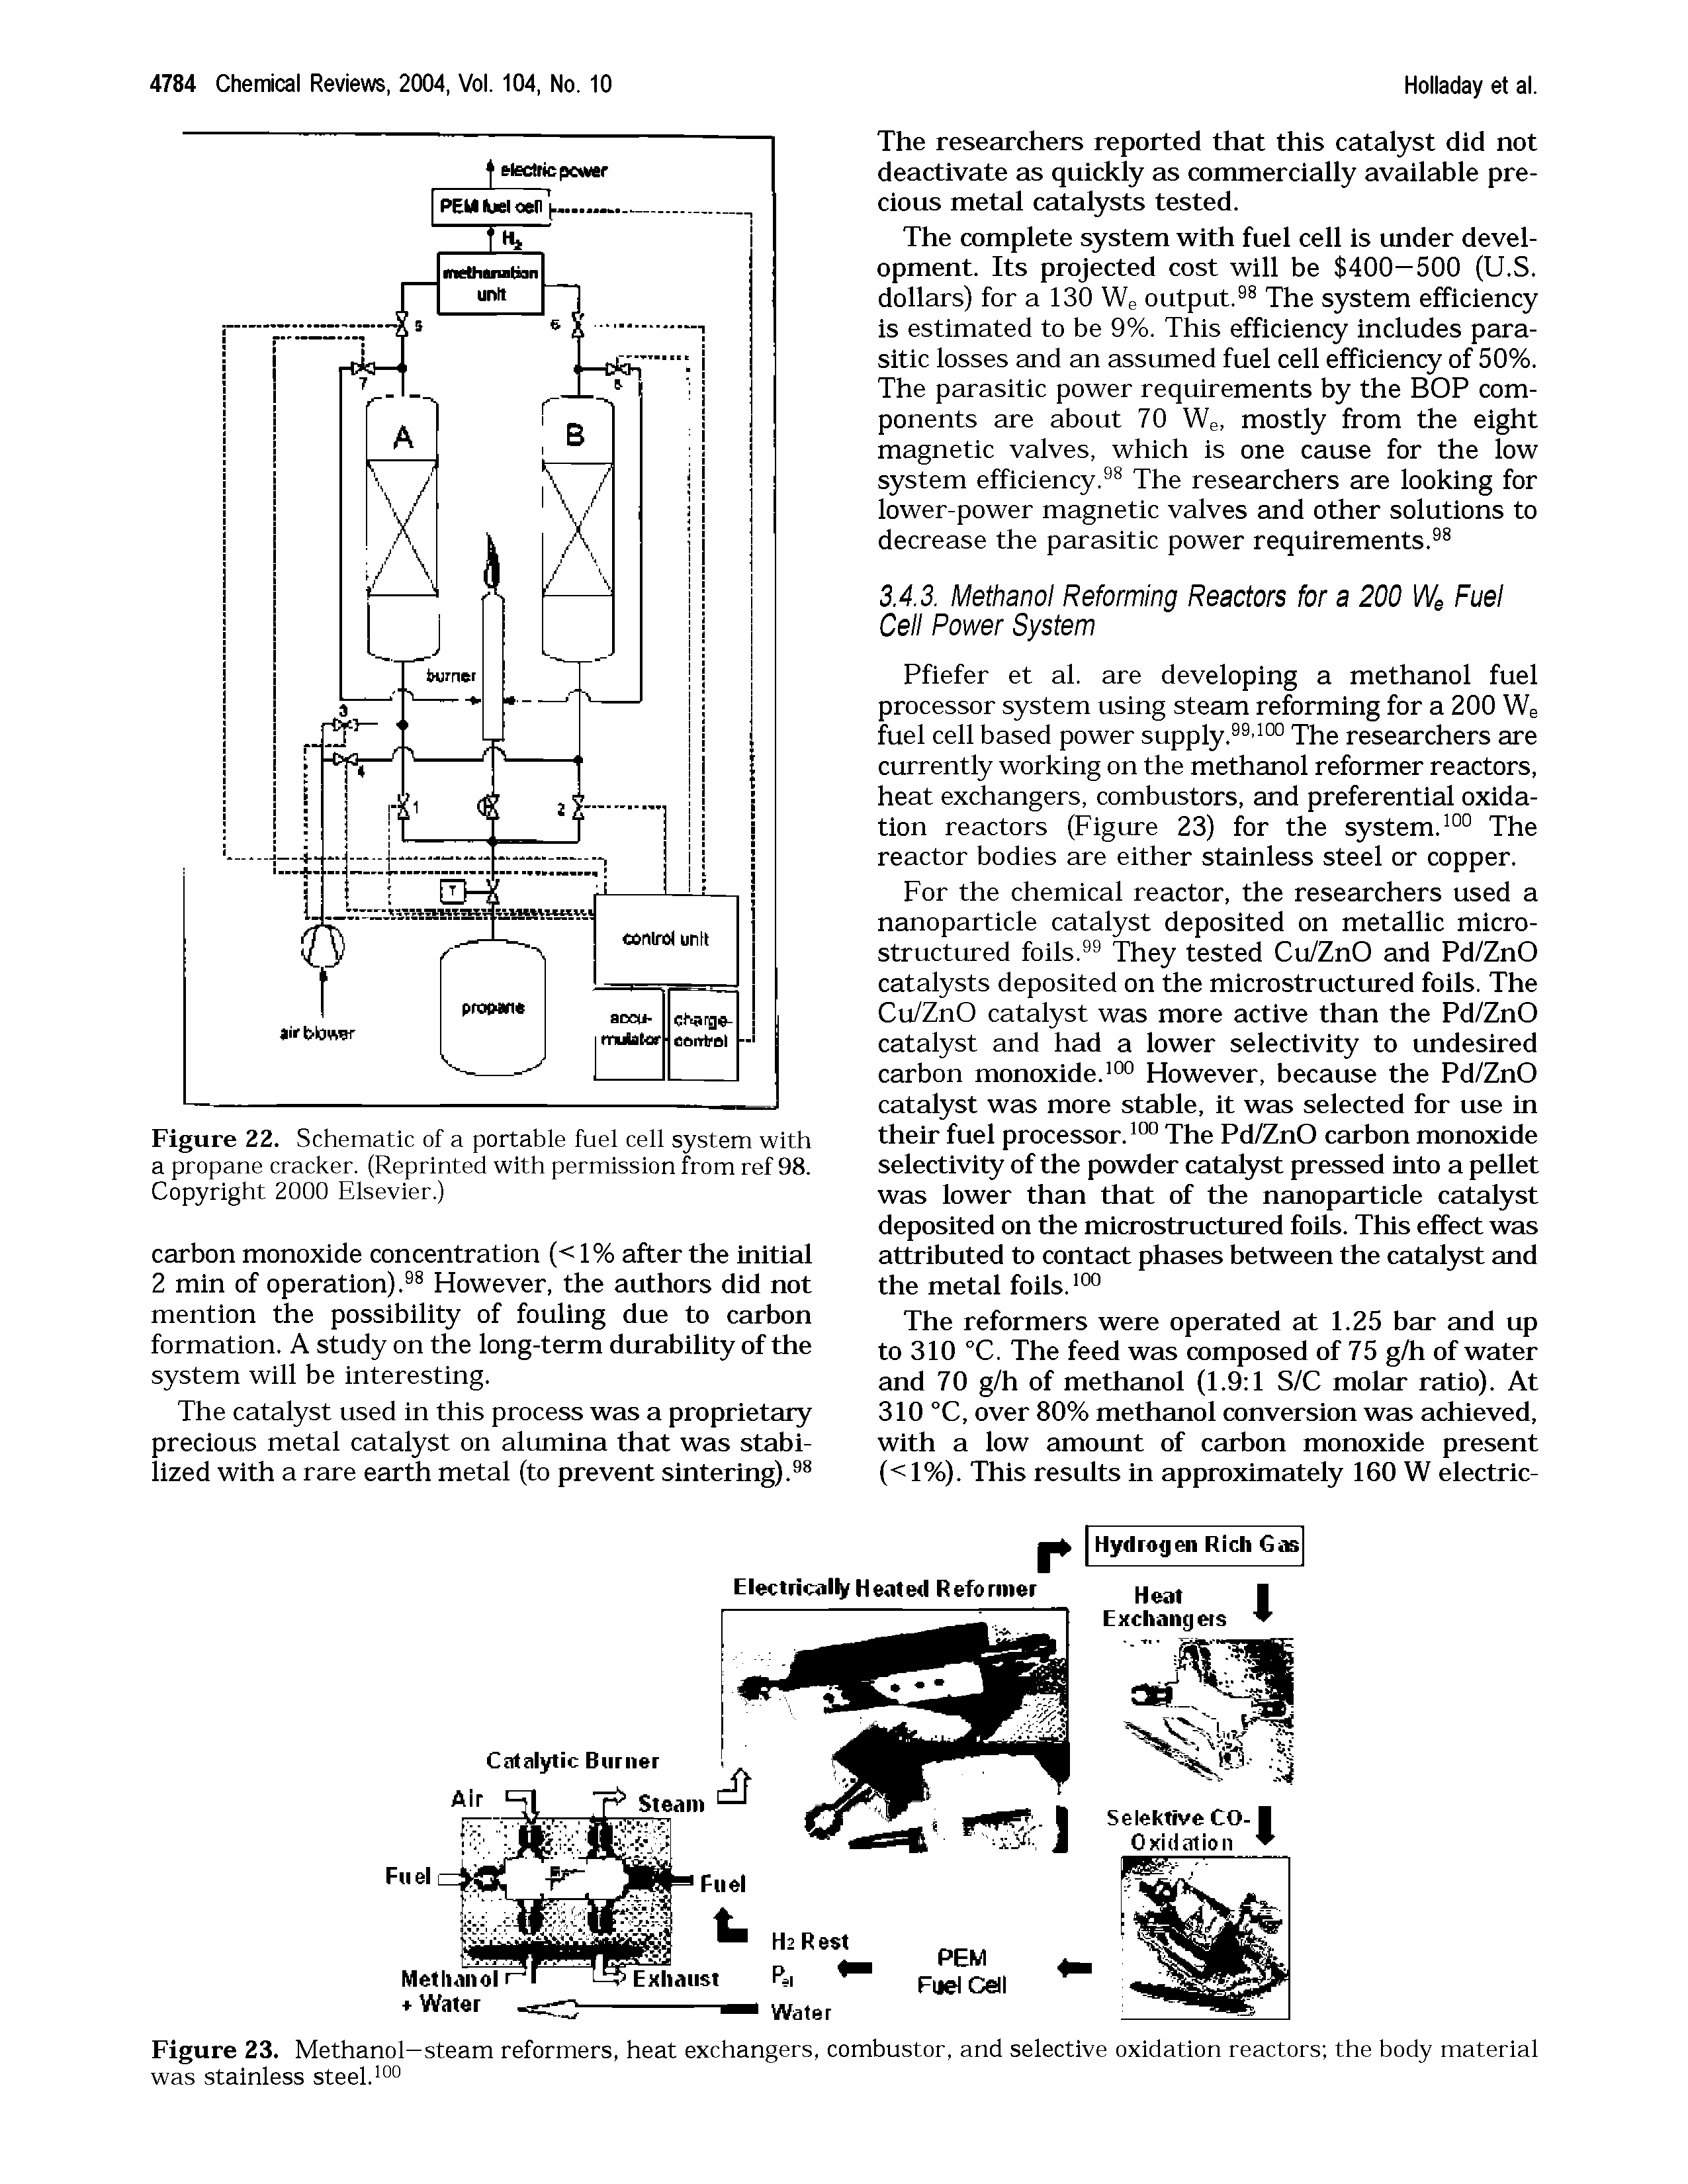 Figure 23. Methanol—steam reformers, heat exchangers, combustor, and selective oxidation reactors the body materiai was stainless steel. ...